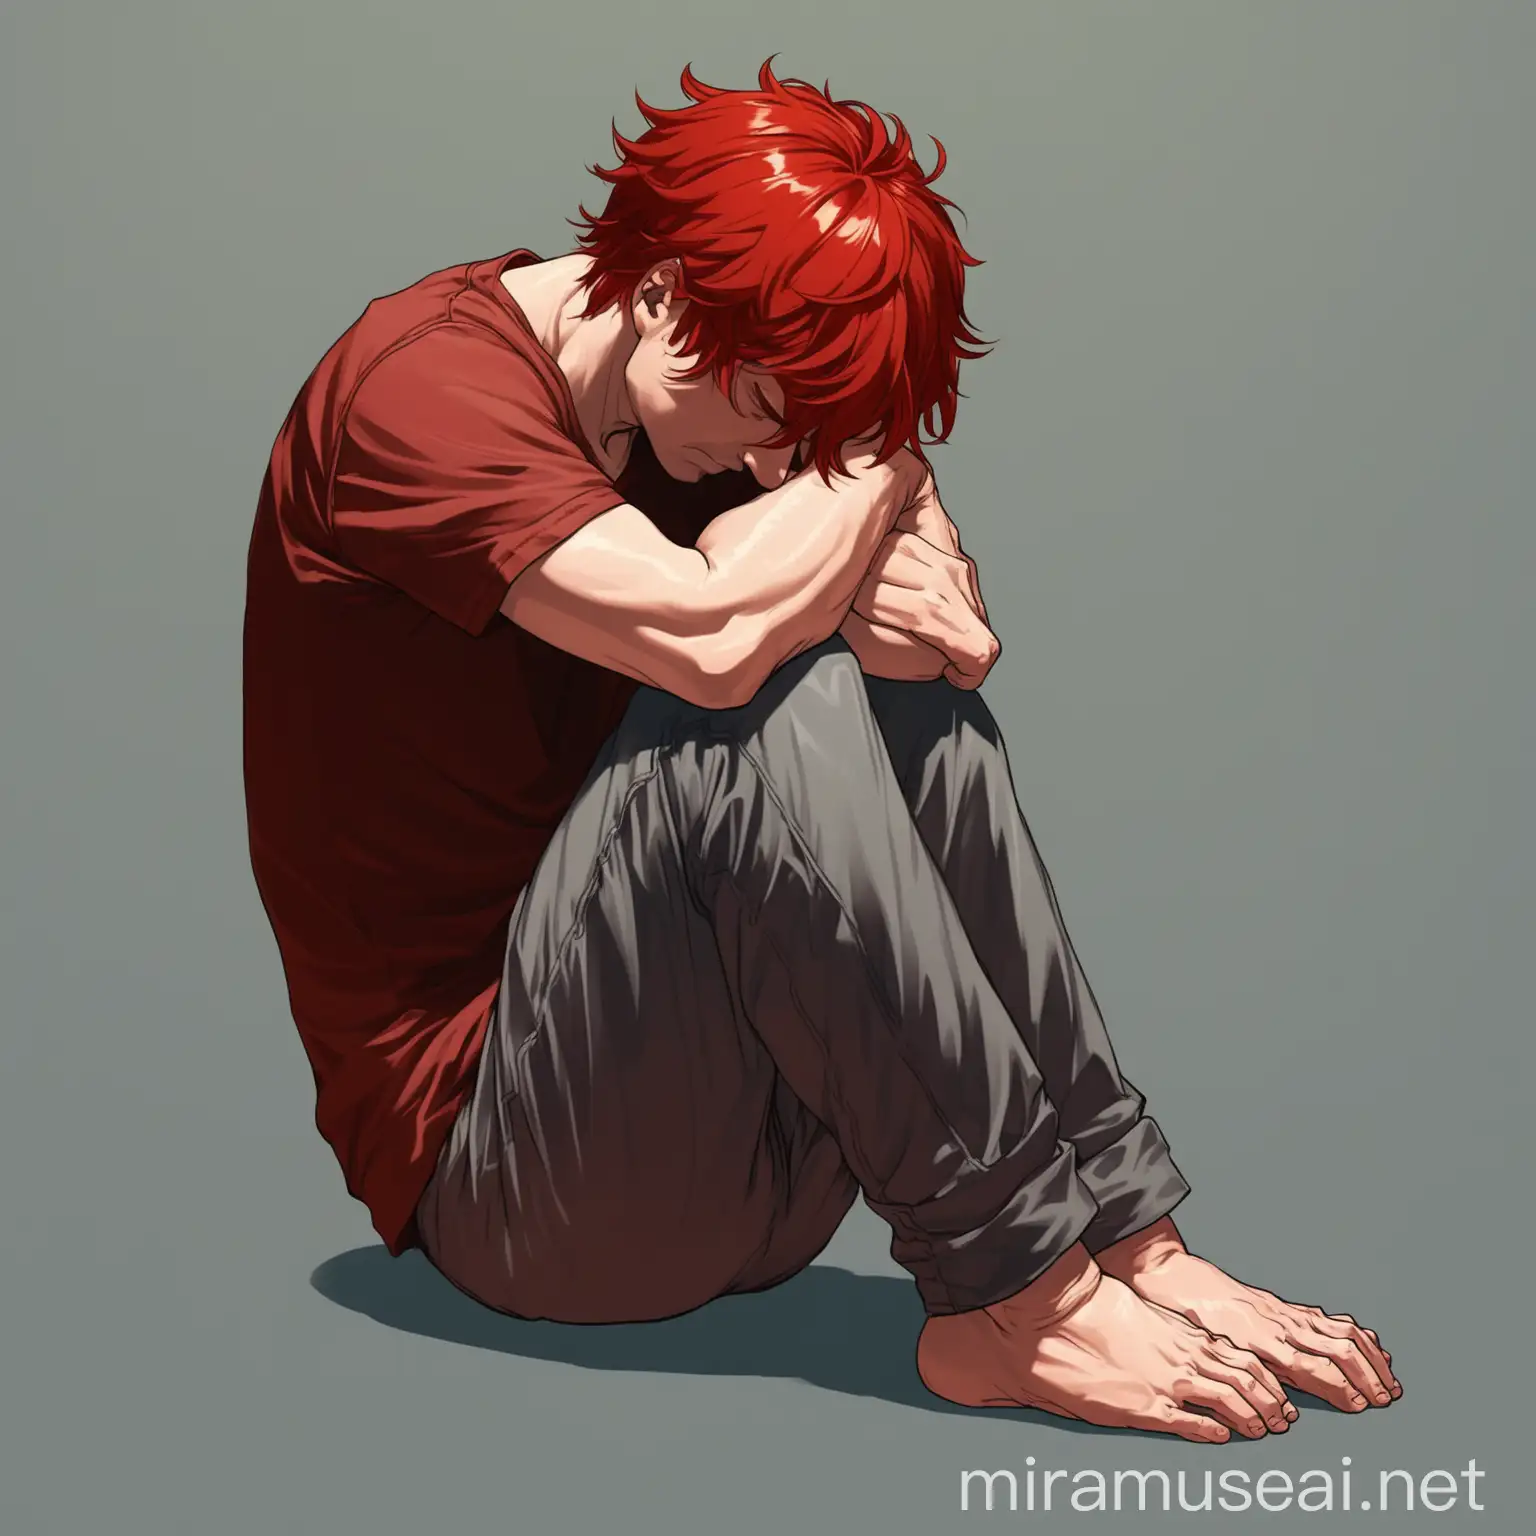 male adult character with red hair. he is in a fetal position, deep in his own thought. 